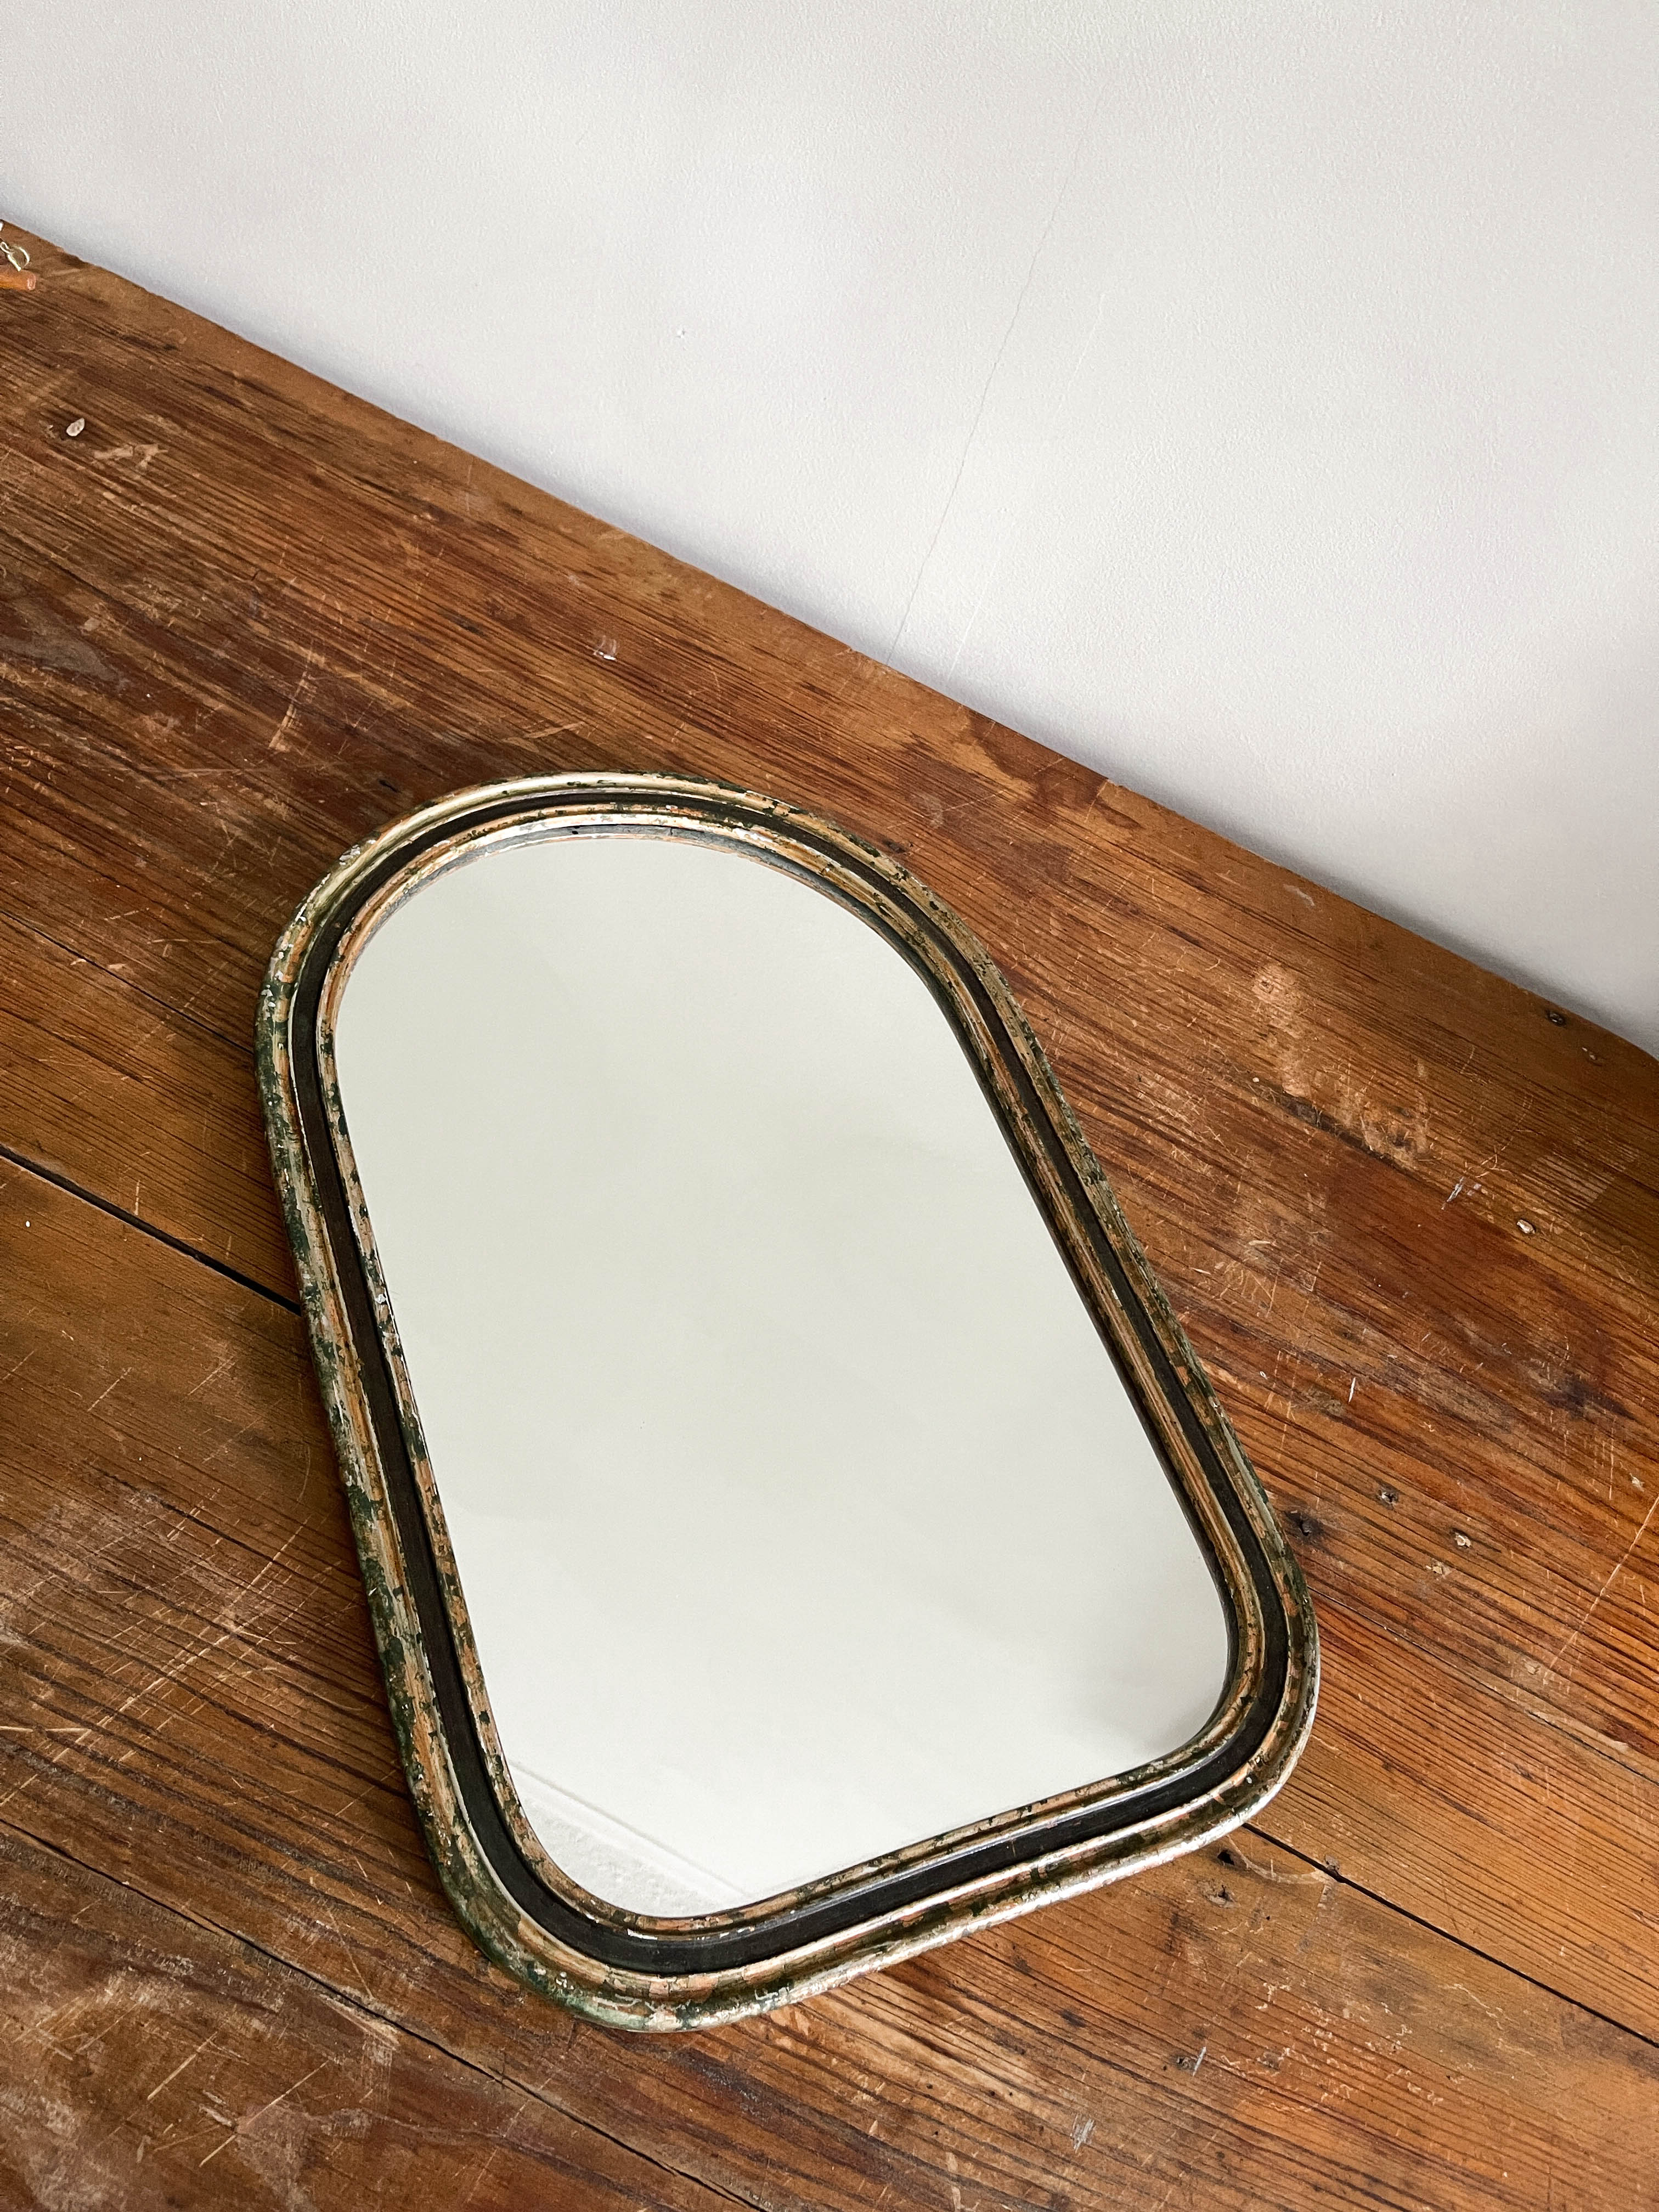 Discover Exquisite Arched Mirrors with Reduced Shipping on a Variety of Home Furnishings and Gifts